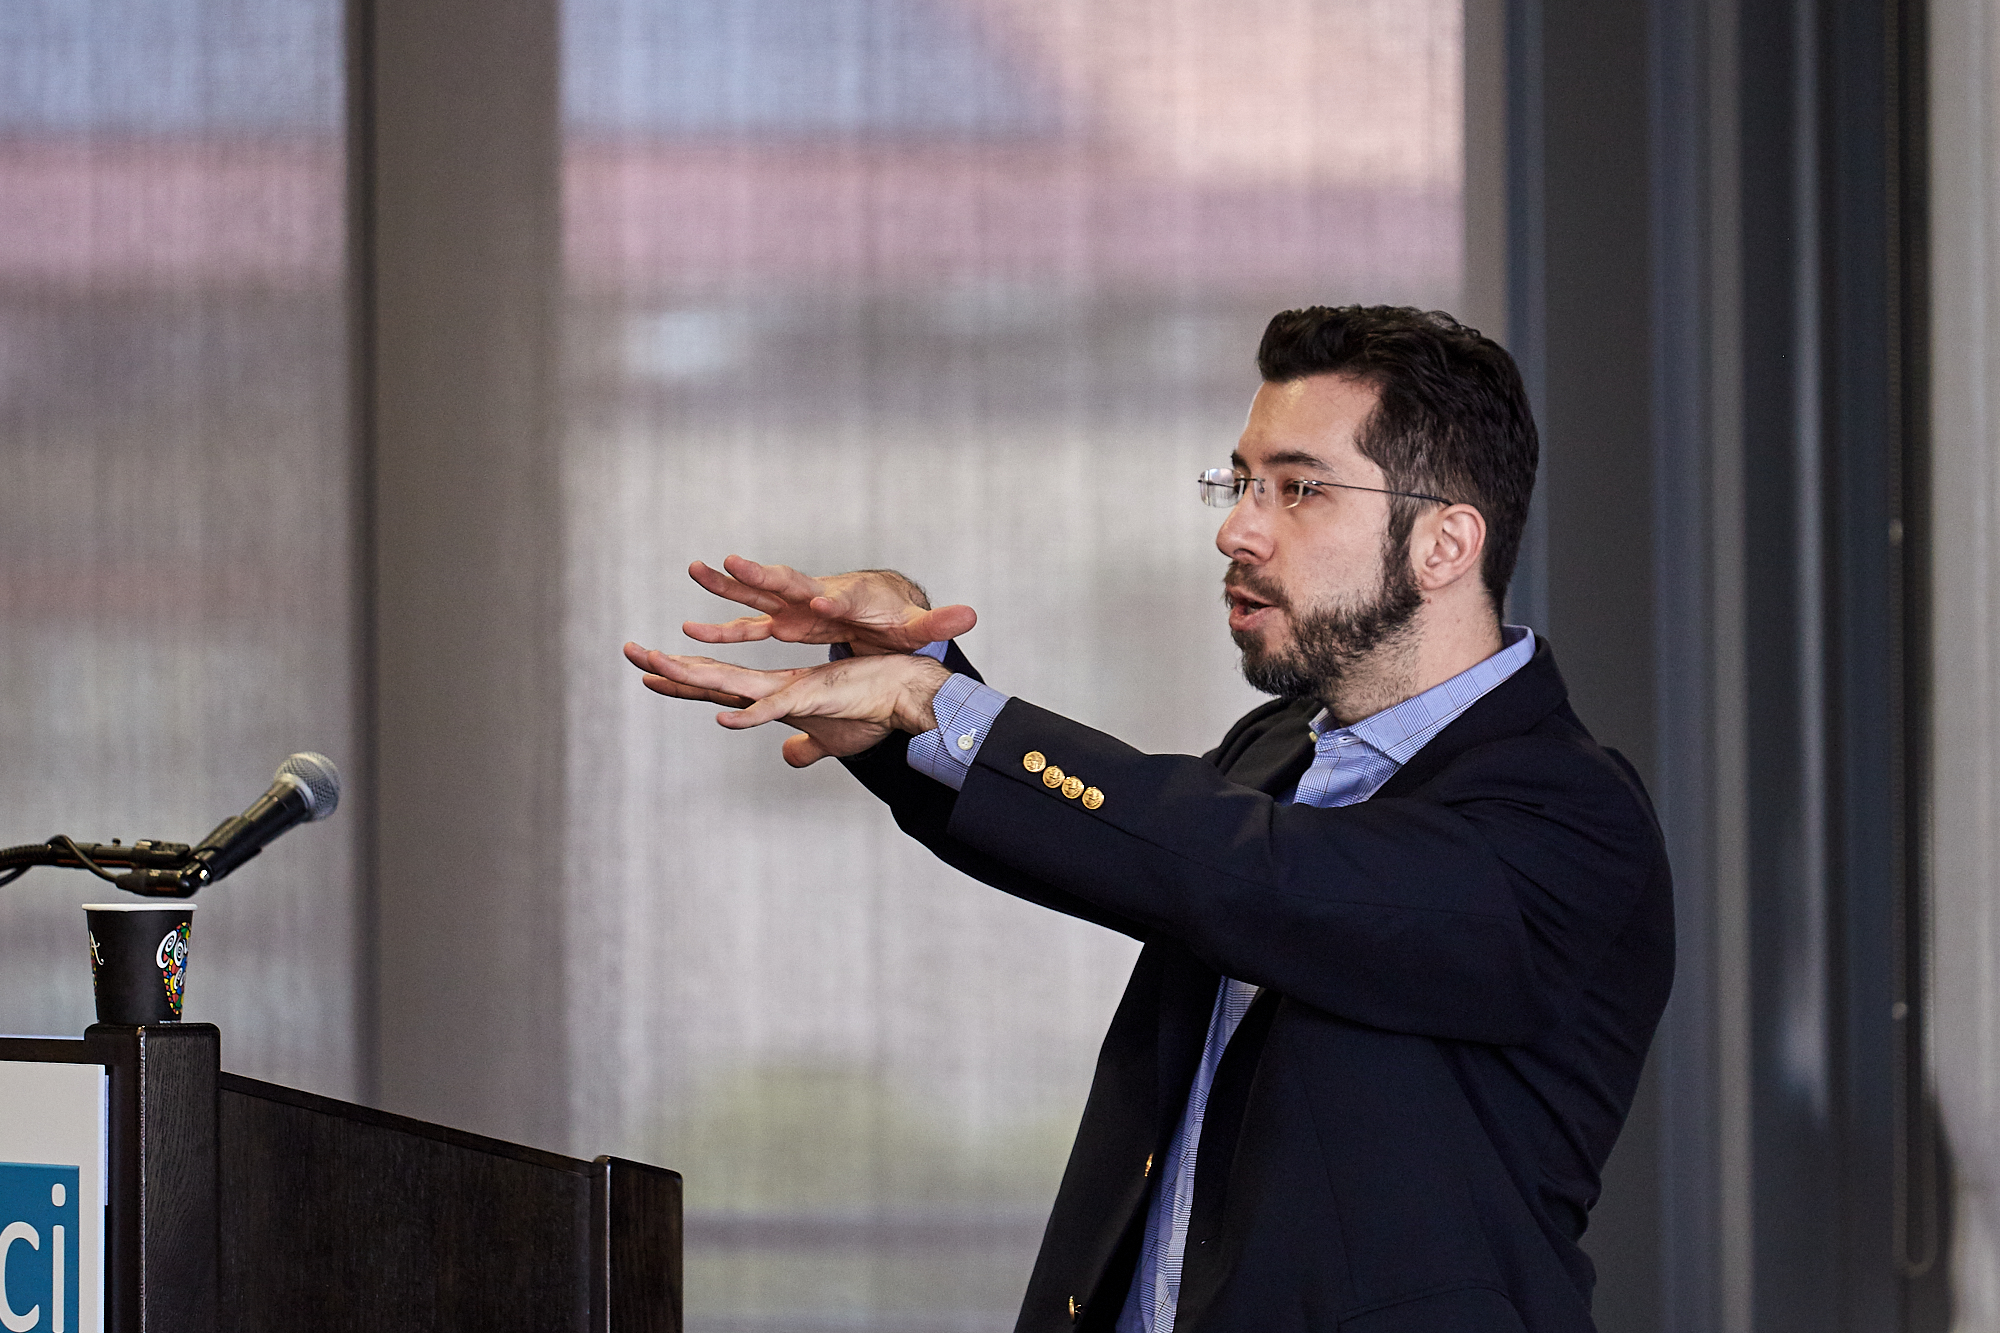 Ed Boyden on tools for mapping, repairing brain circuitry | ApplySci @ Stanford